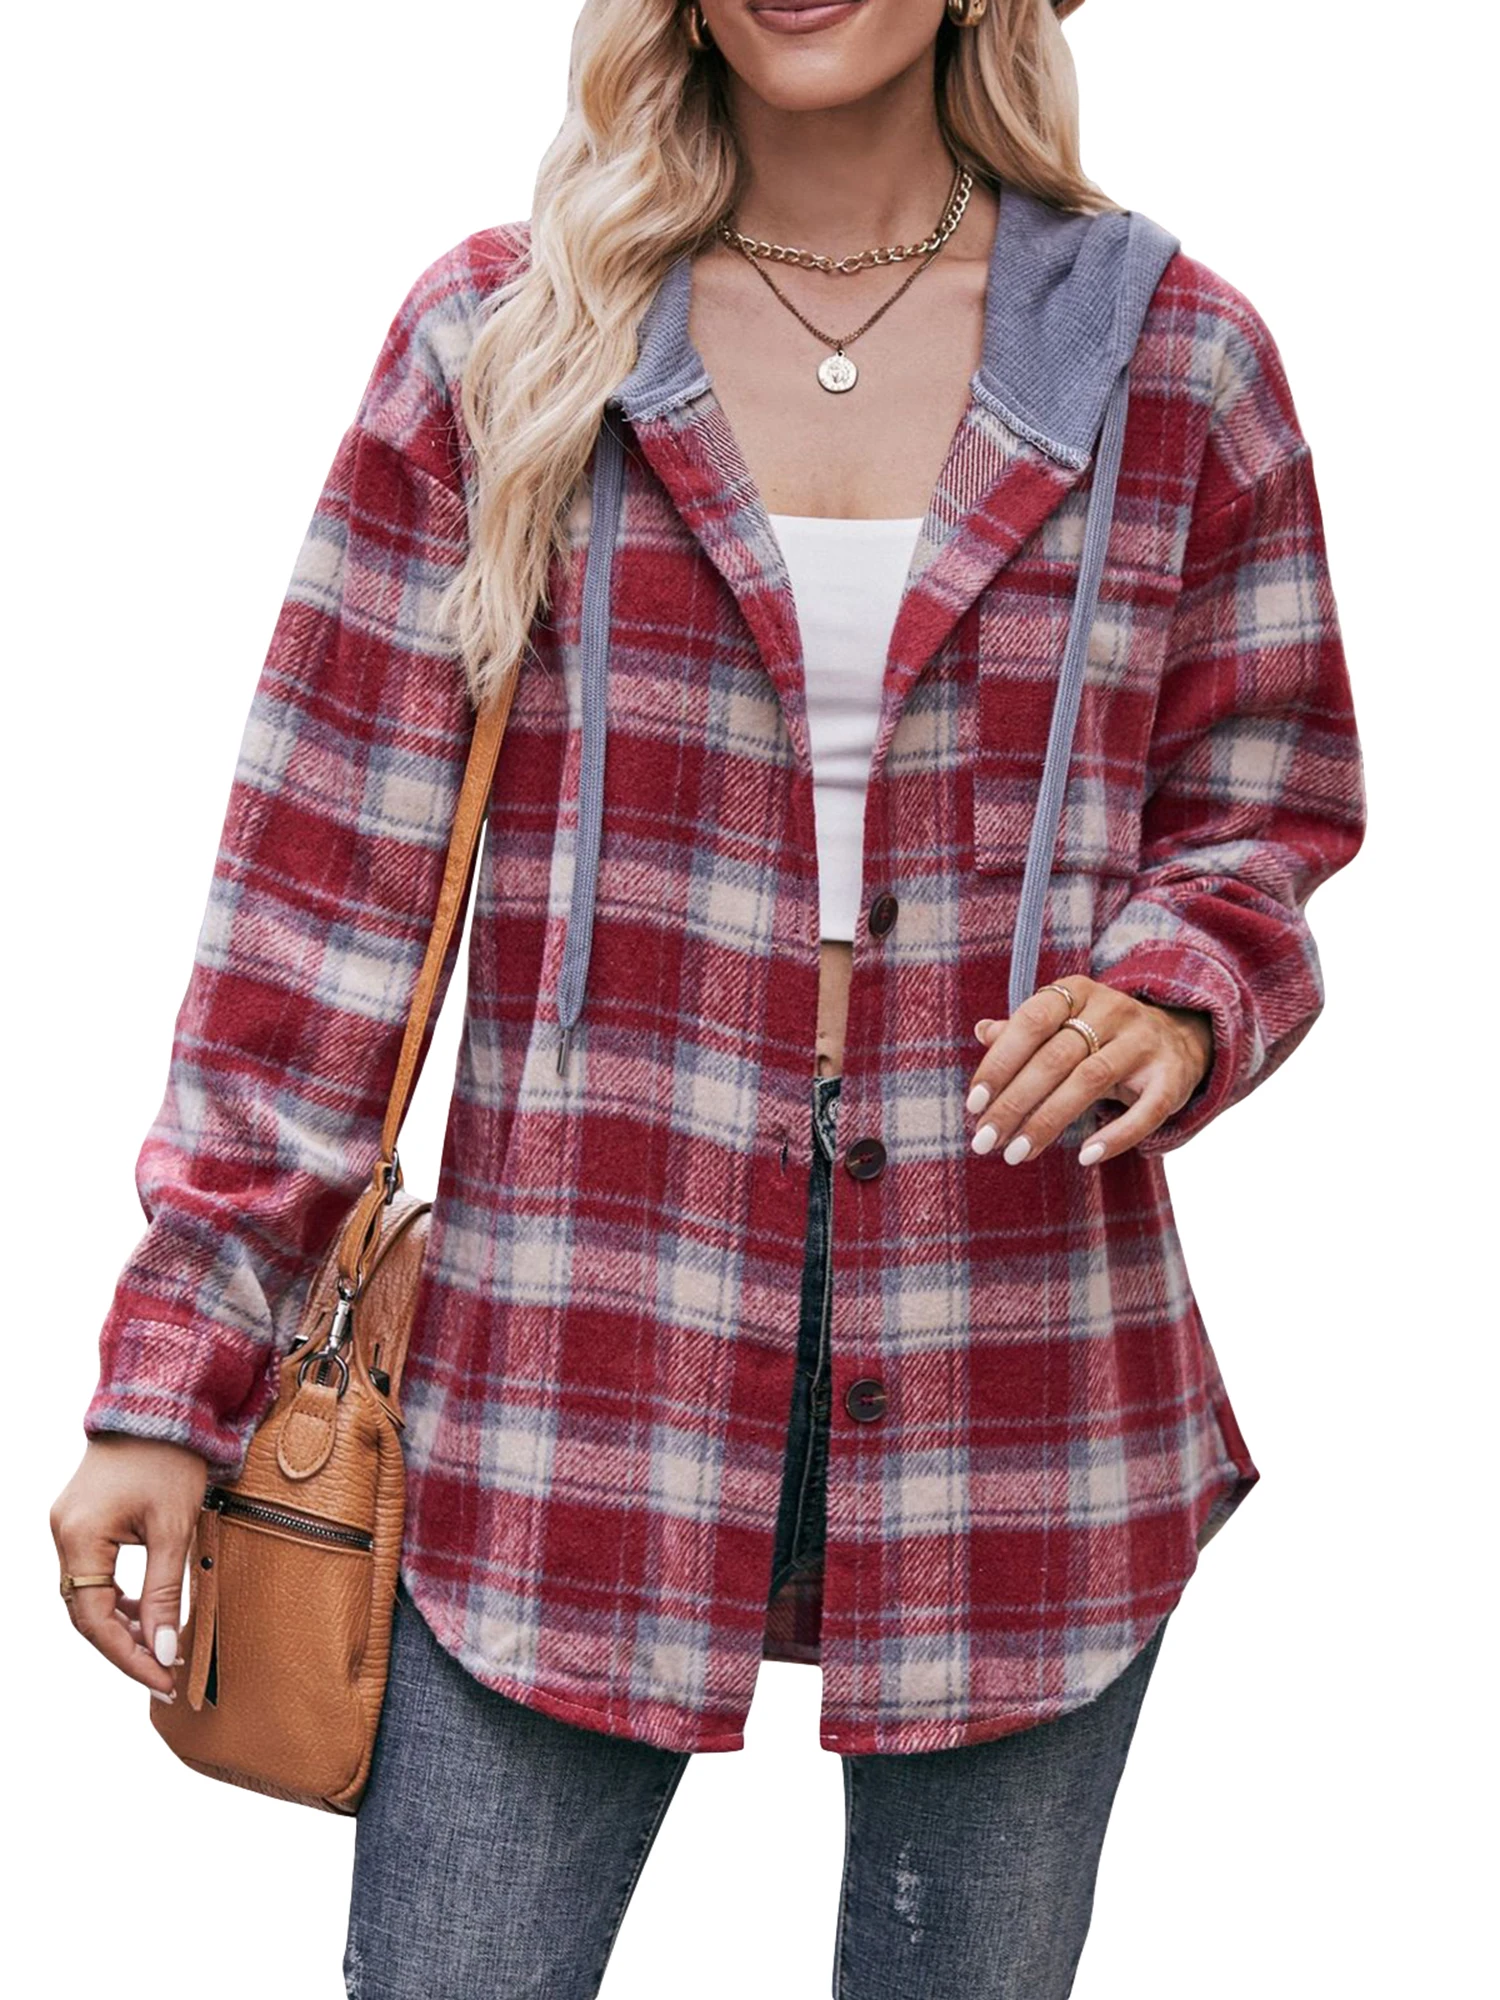 

Gloomia Women s Plaid Shacket Jacket with Hood - Stylish Long Sleeve Button Down Oversized Blouse Top for a Boyfriend Look